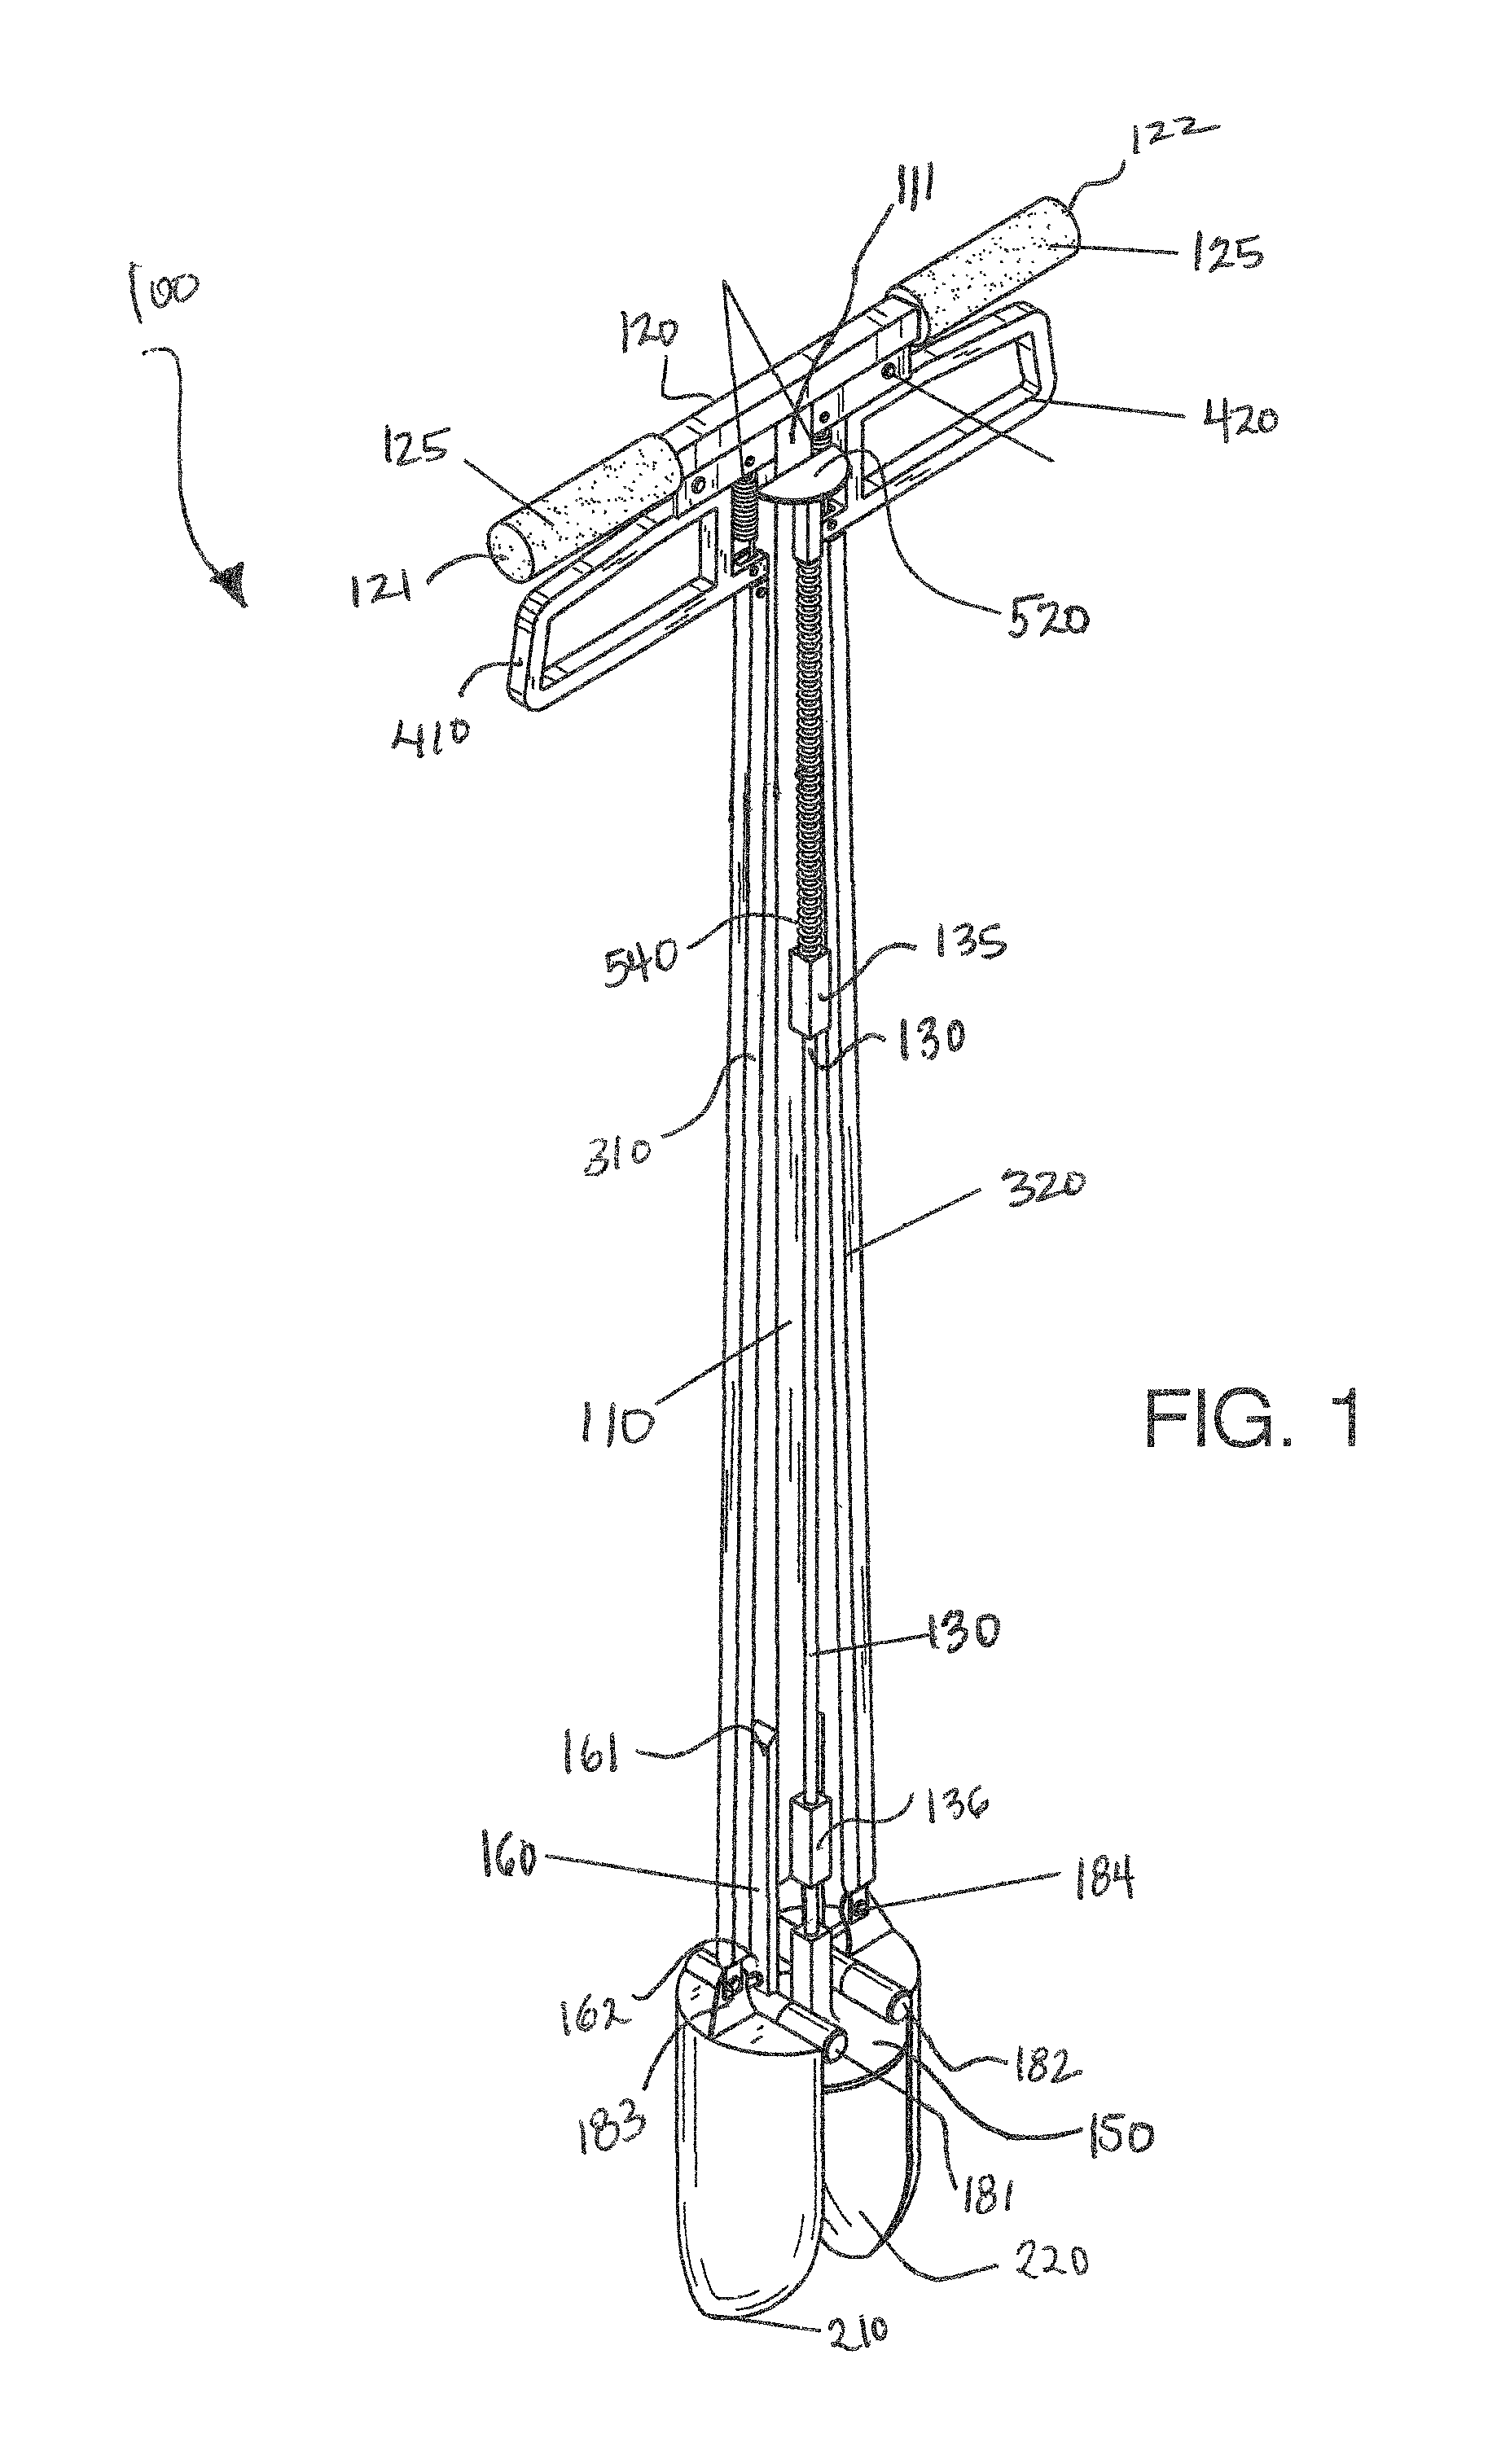 Hole digging device